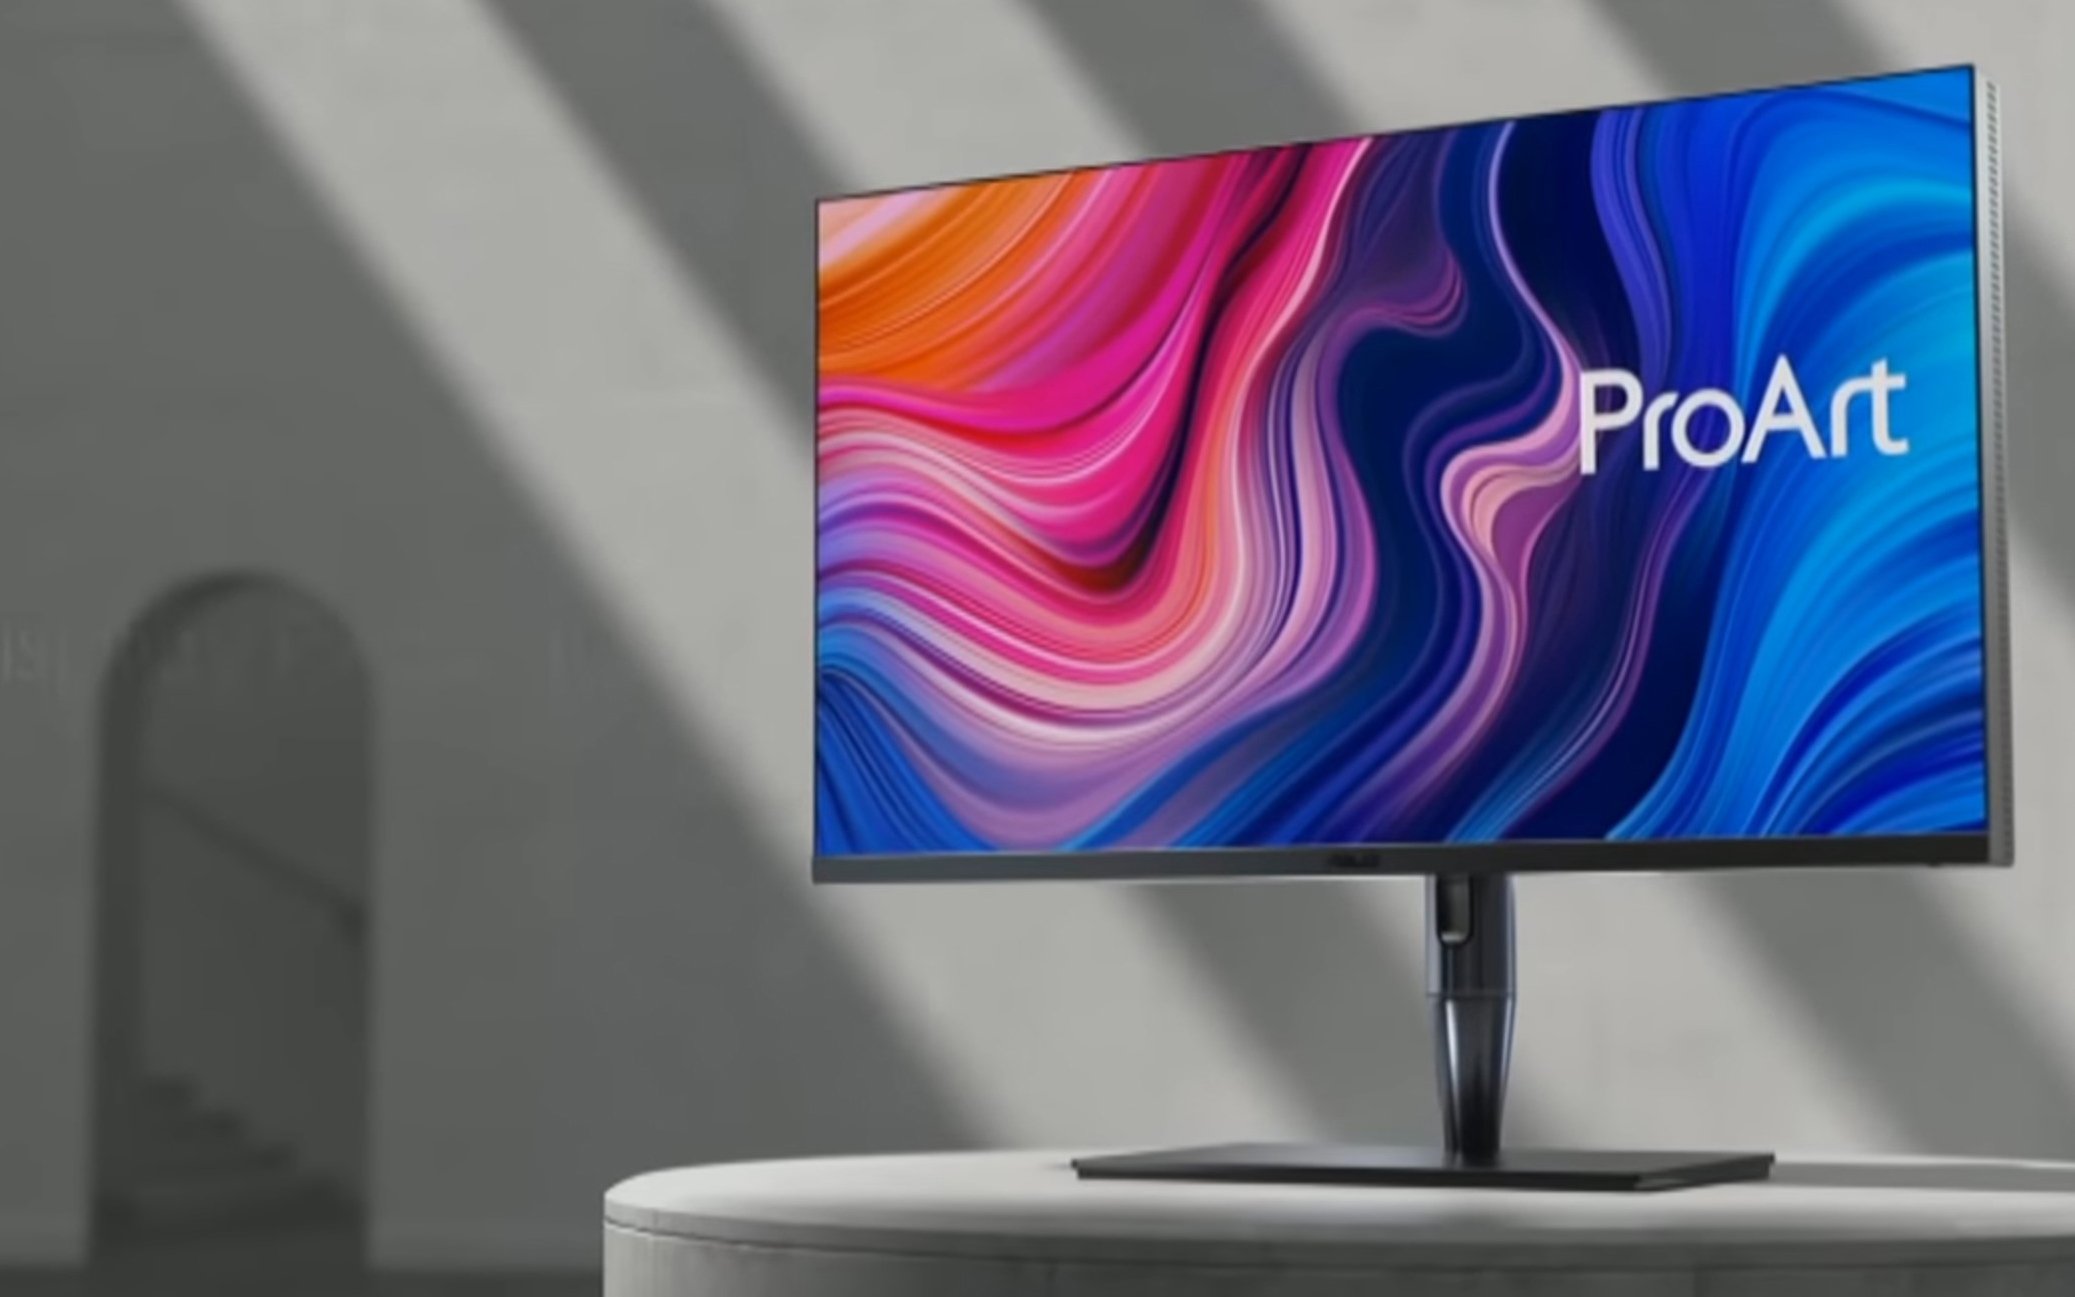 ASUS New 1600-nit 4K ProArt Display Challenges Apples Pro Display XDR